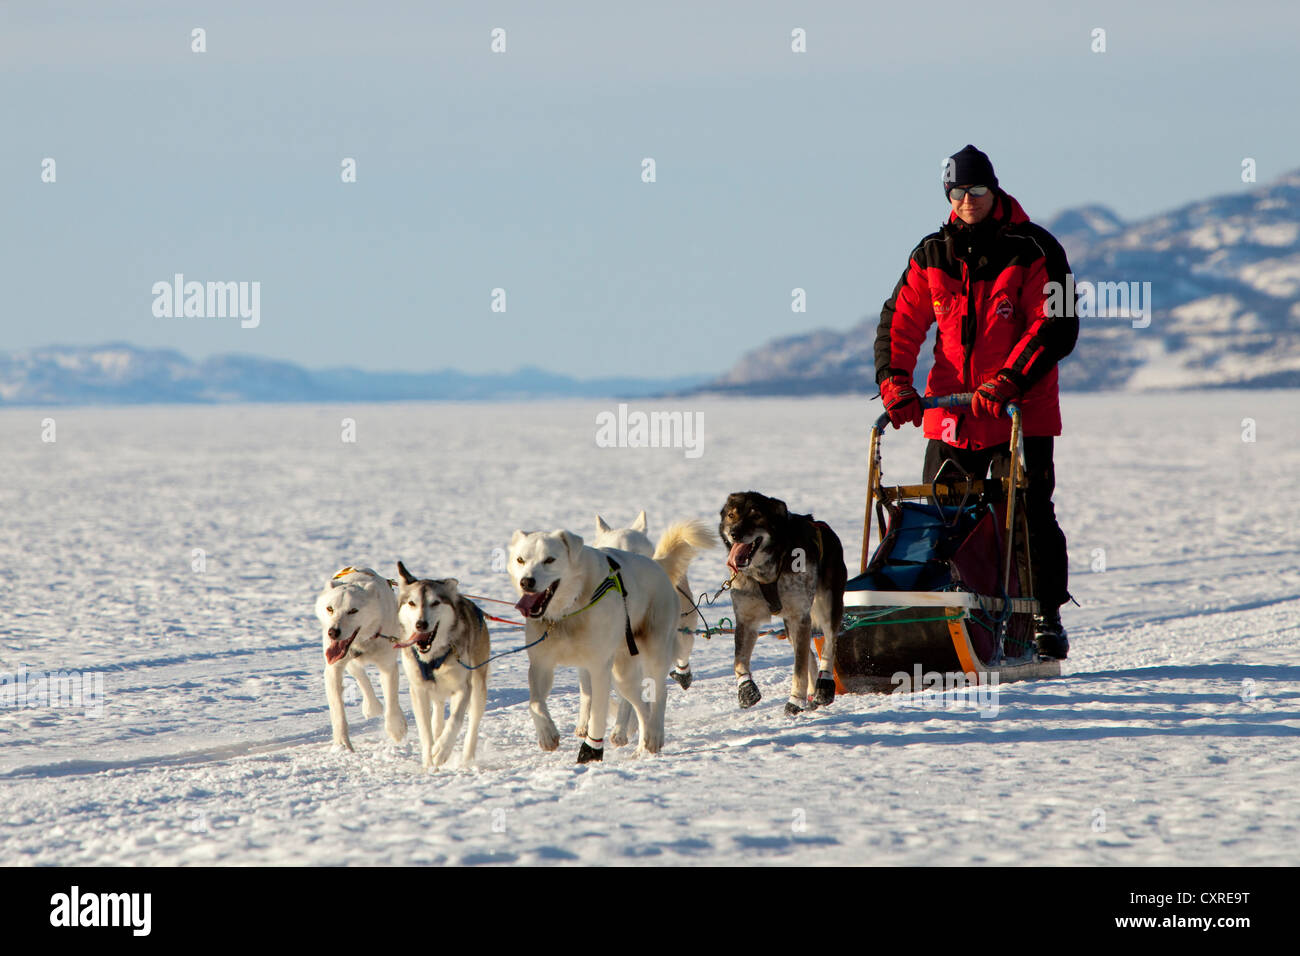 Musher running, driving a dog sled, team of sled dogs, two white leaders, lead dogs, Alaskan Huskies, Mountains behind Stock Photo